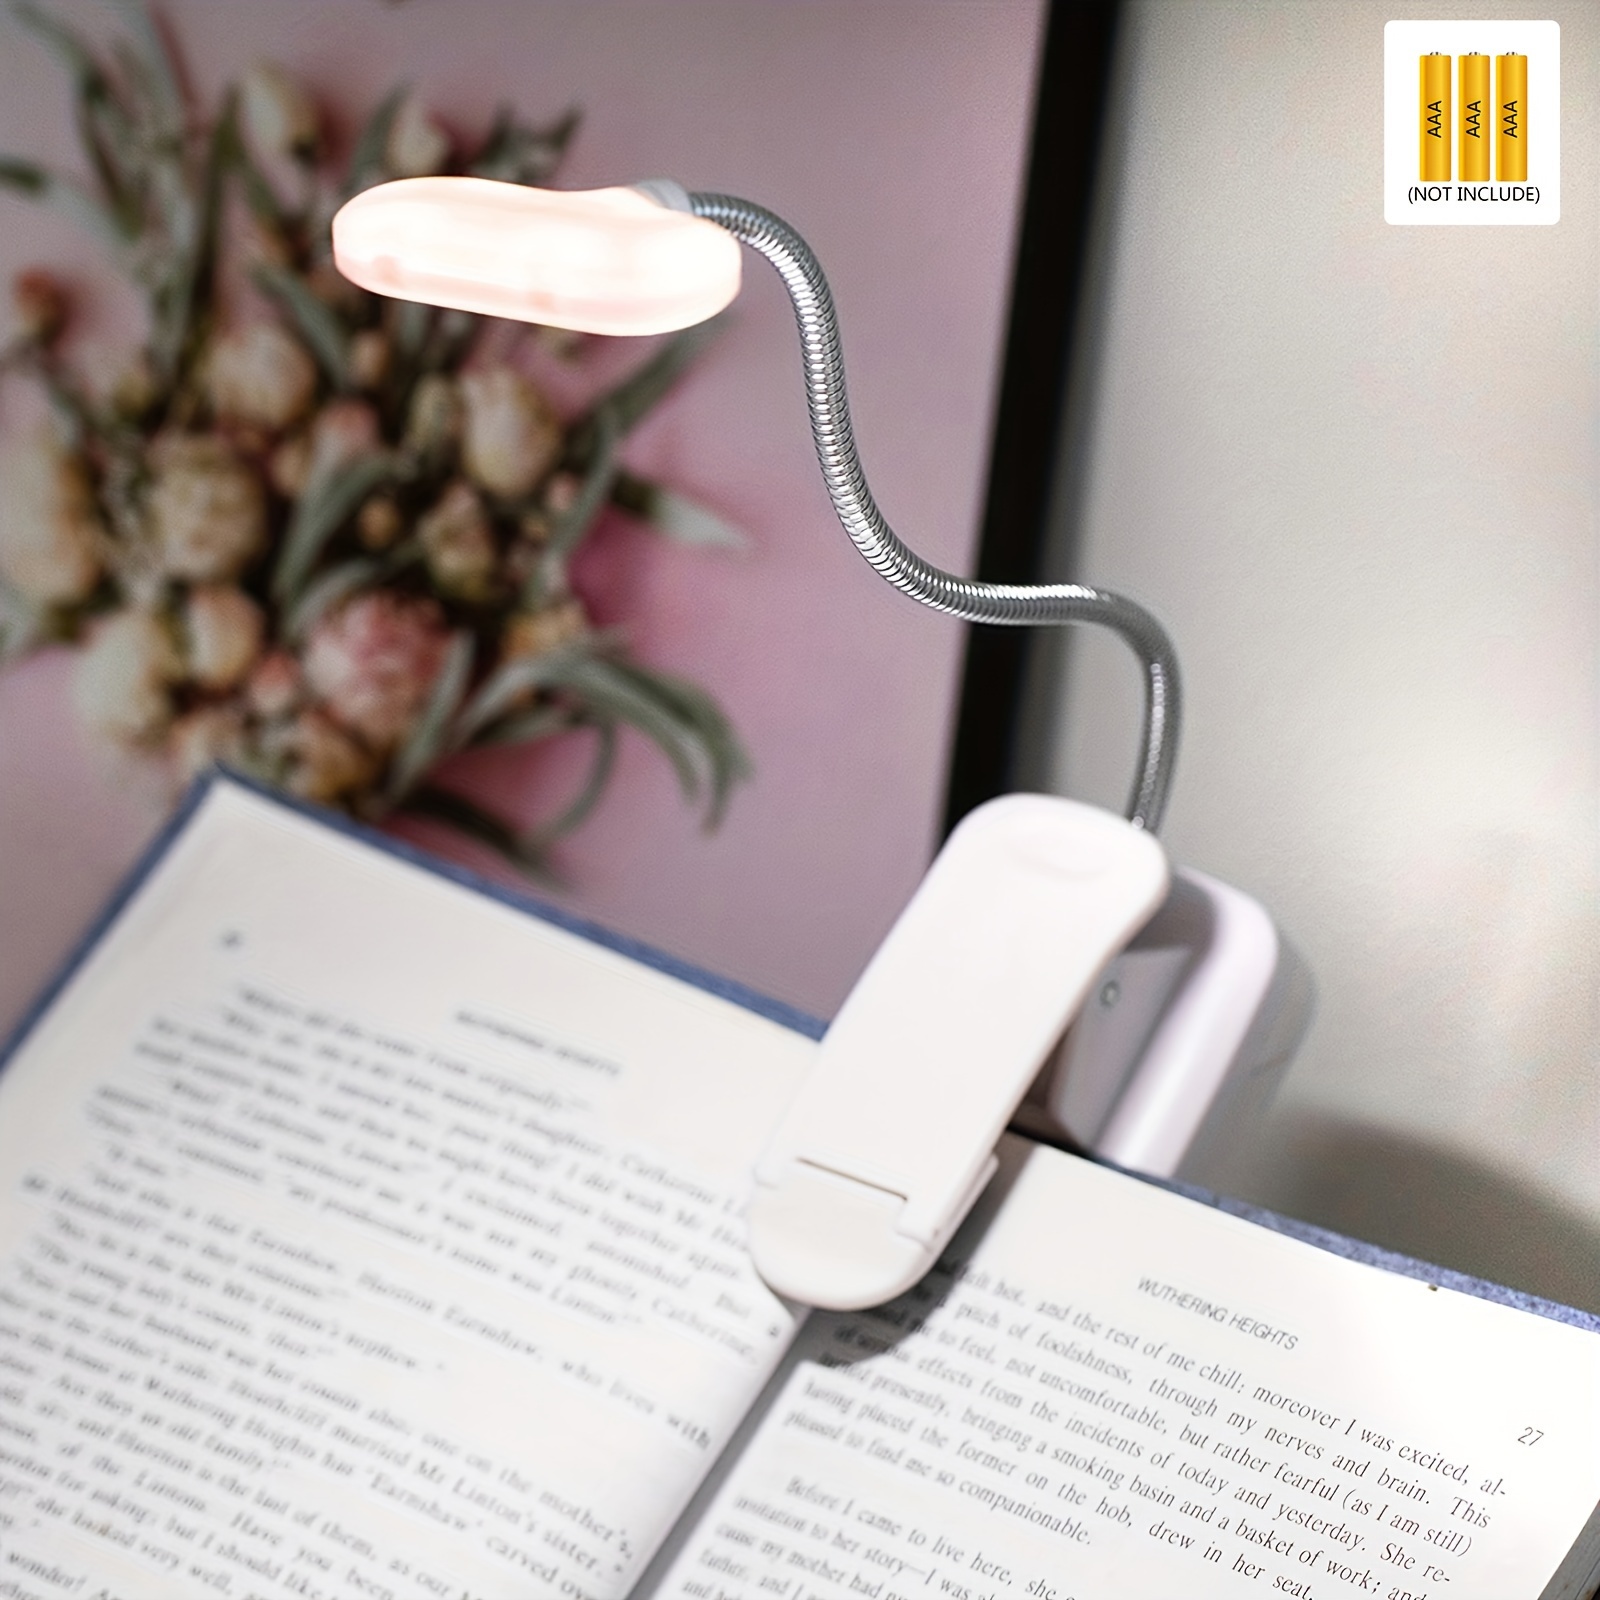 

1pc Clip On Book Light, Battery Powered Flexible Reading Lamp, Desktop Small Table Lamp, Portable Small Night Light For Room Decor